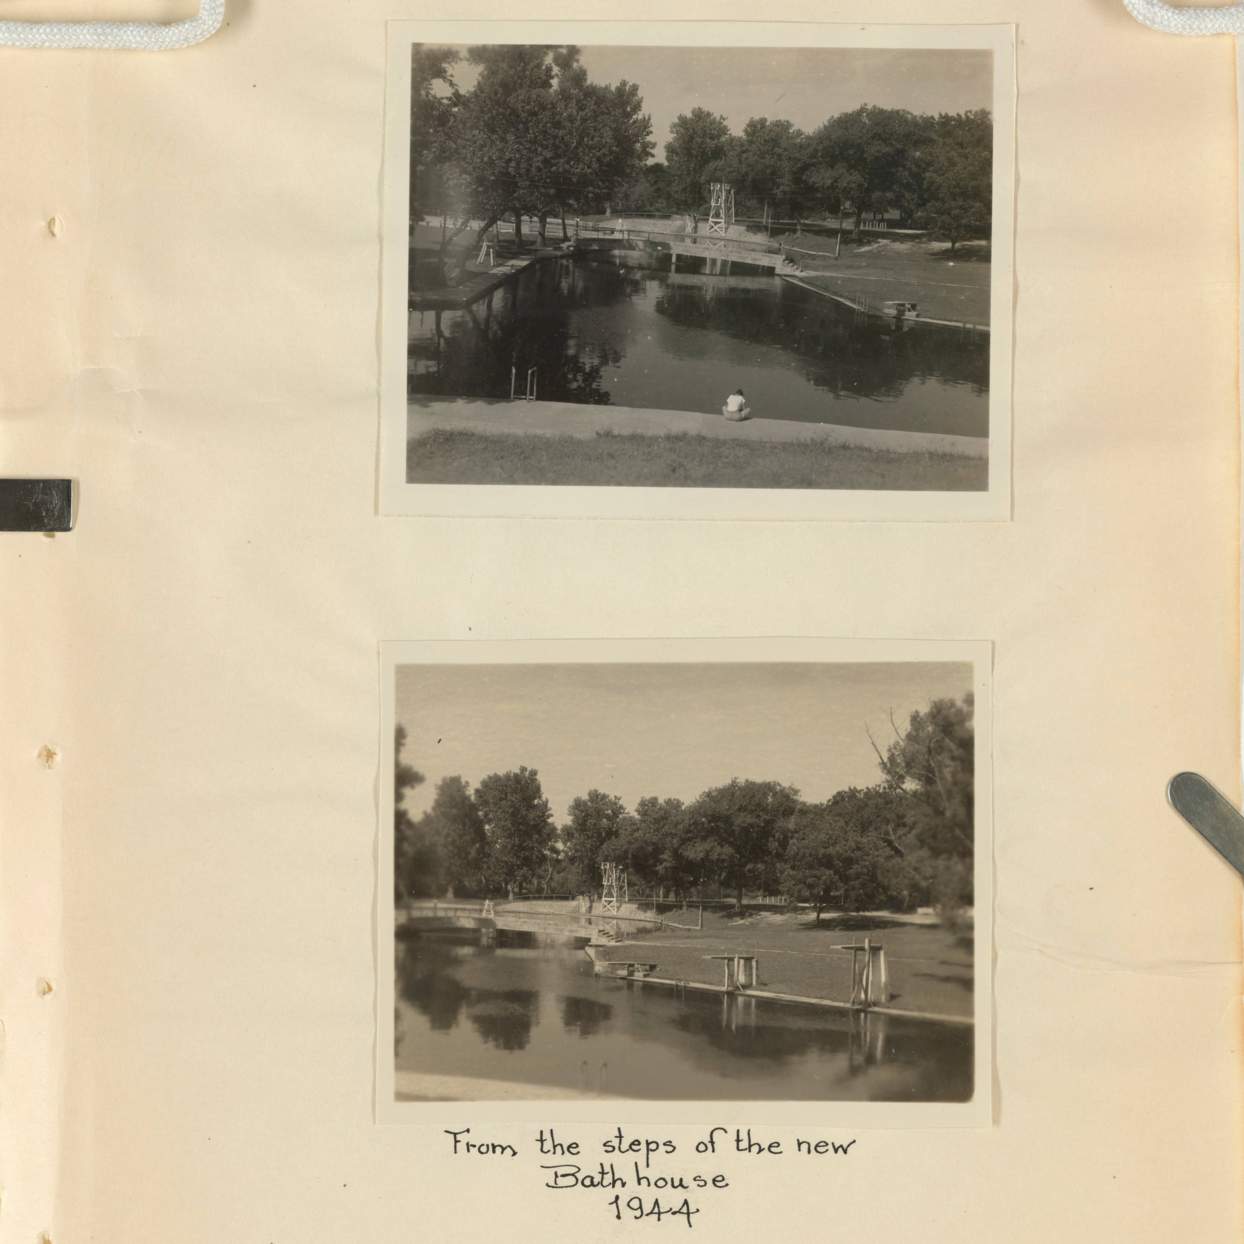 two pictures of riverside from the steps of the new bath house in 1944